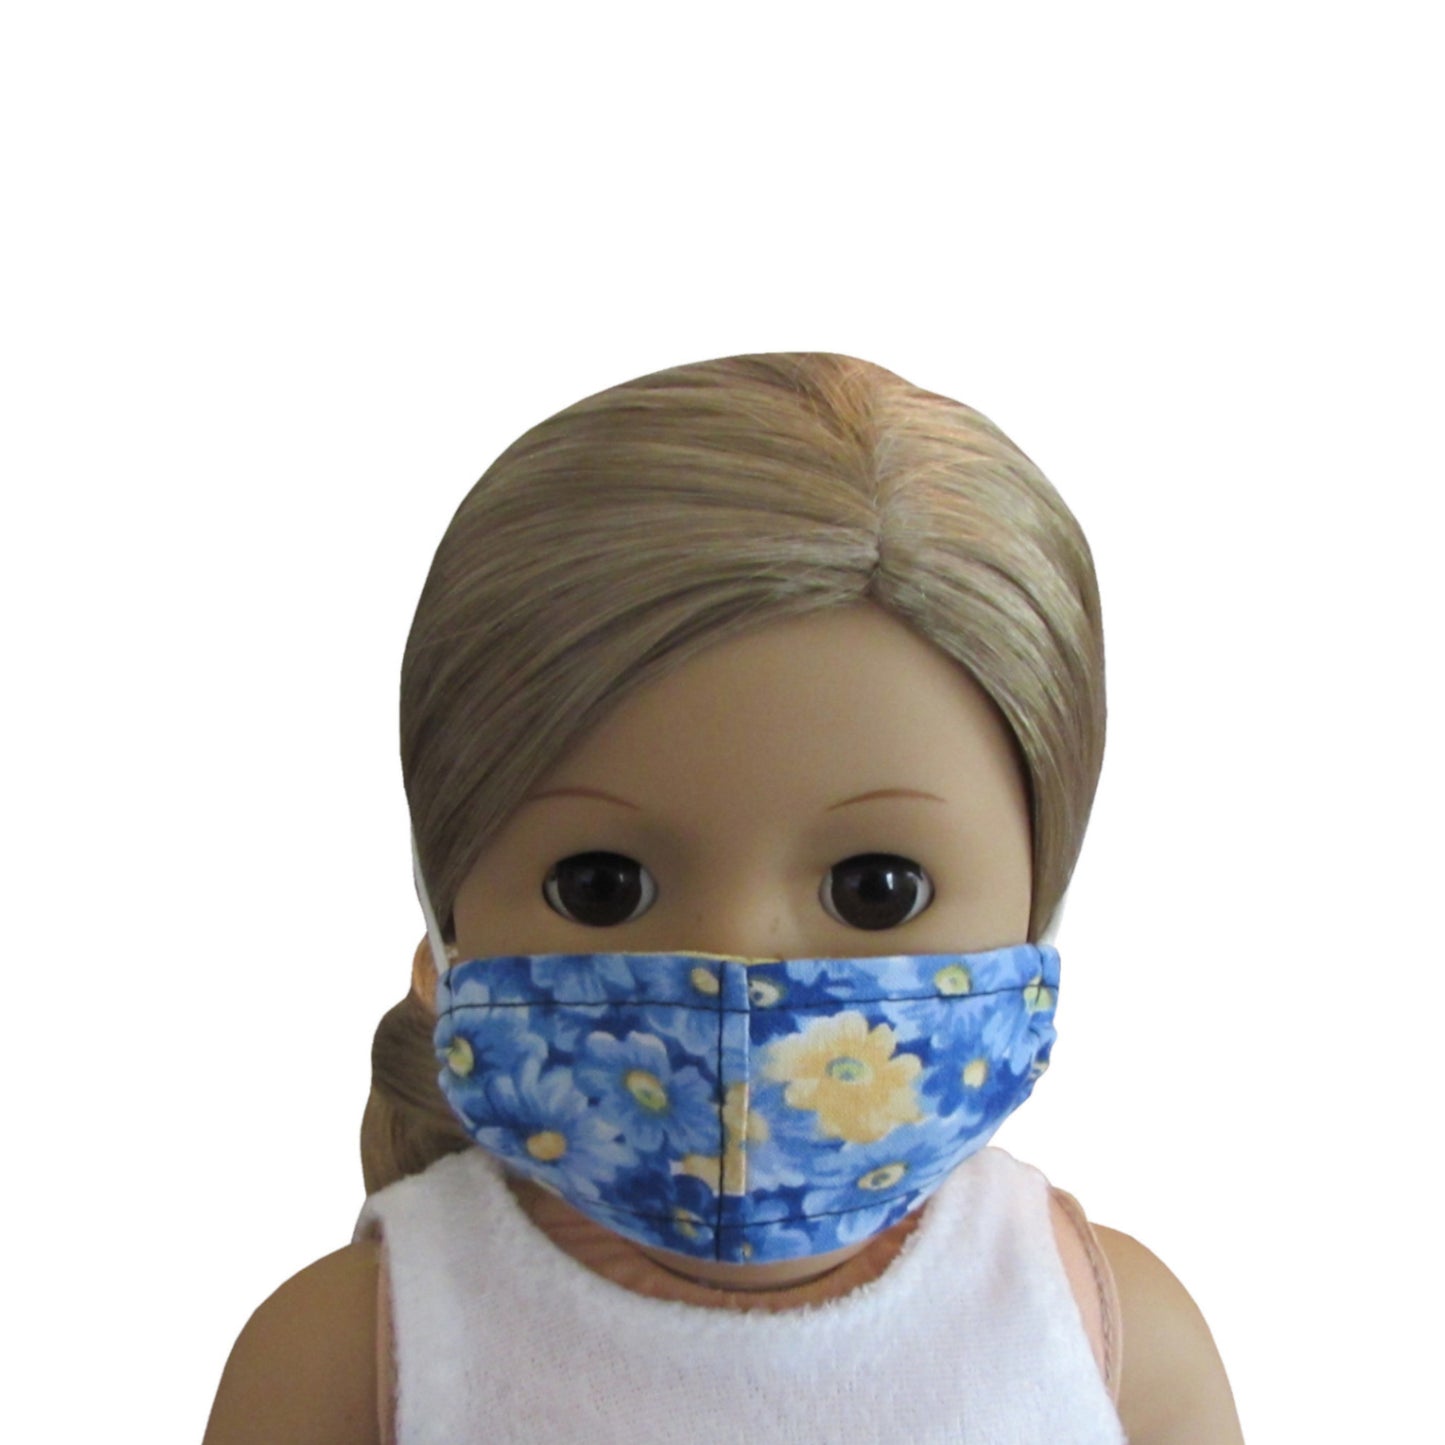 Multi-Blue and Yellow Floral Print Doll Face Mask for 18-inch dolls with American Girl doll Front